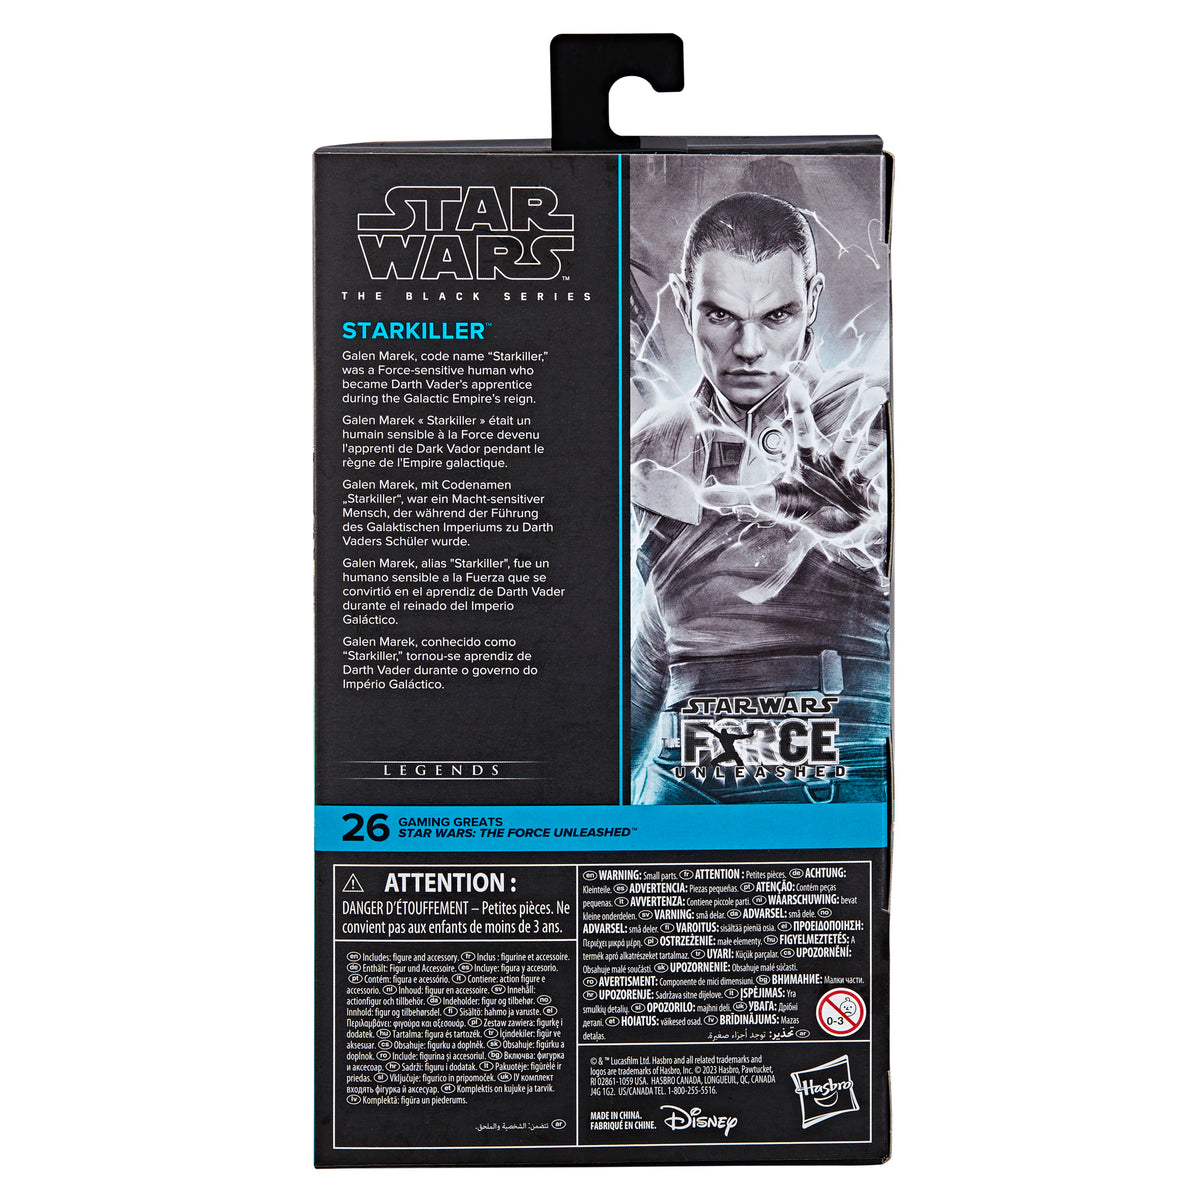 STAR WARS The Black Series Starkiller (Galen Marek) 375 - The Black Series  Starkiller (Galen Marek) 375 . Buy Starkiller toys in India. shop for STAR  WARS products in India.